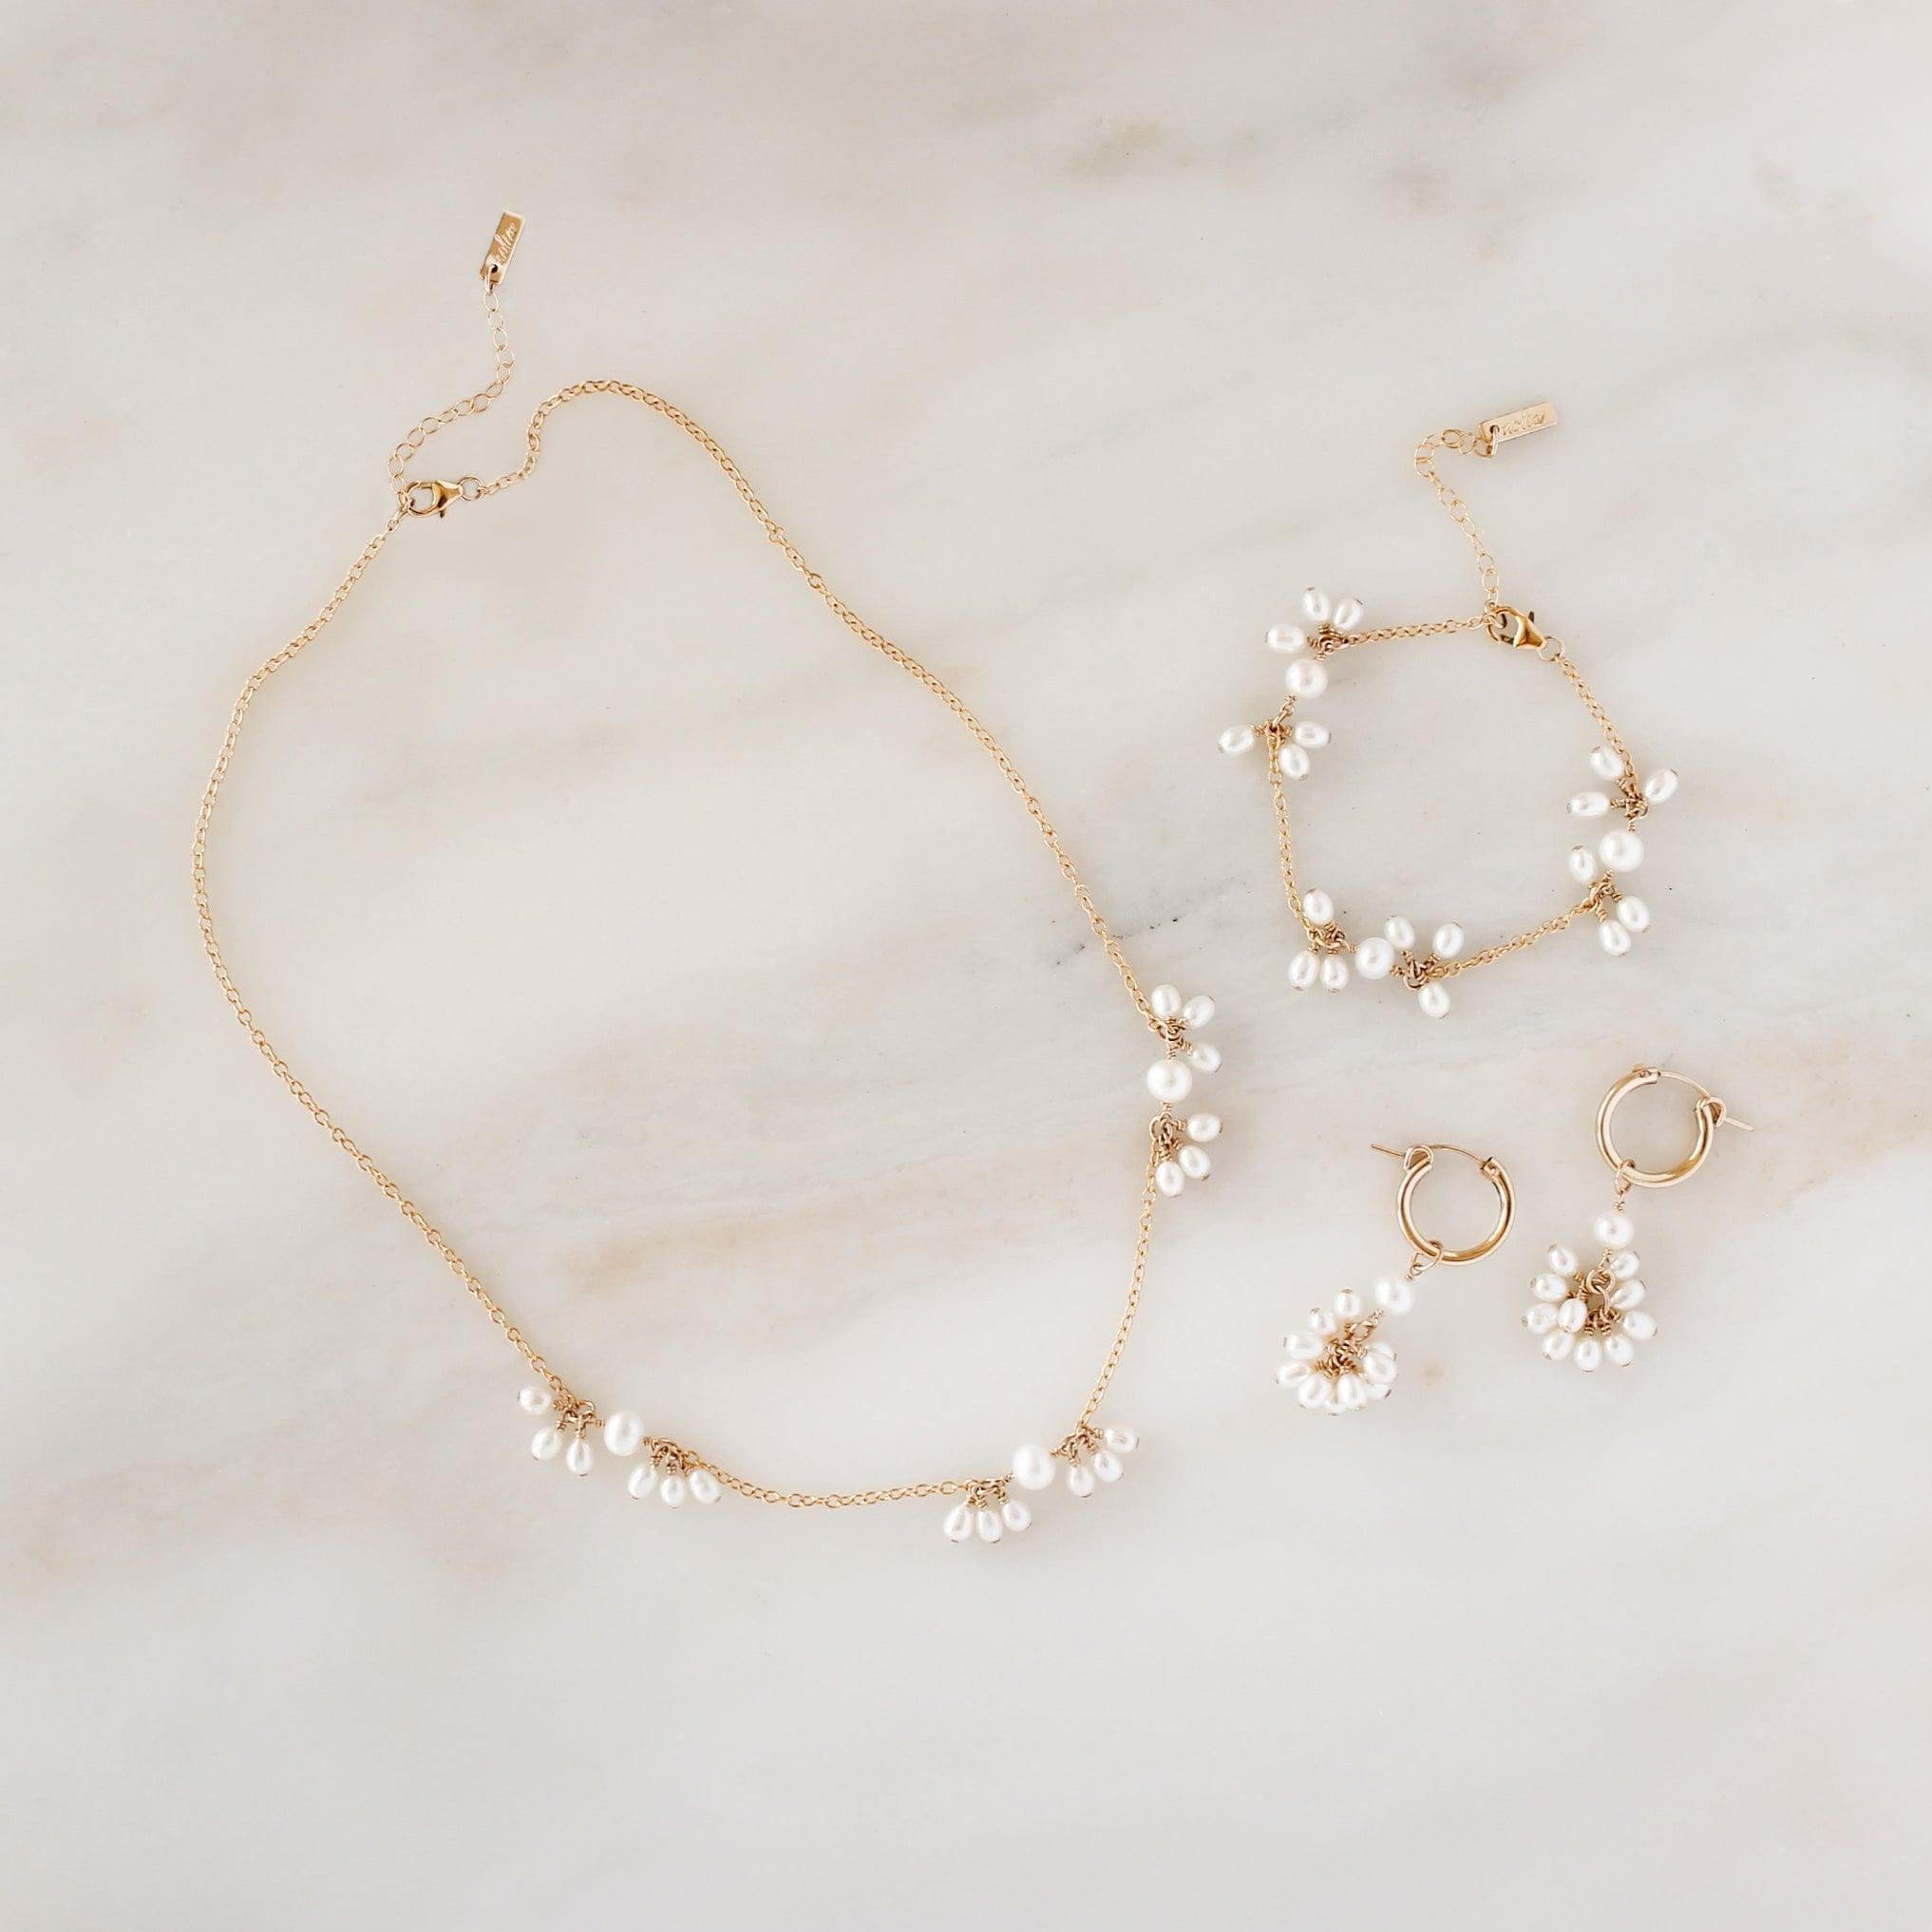 Pearl Blossom Necklace - Nolia Jewelry - Meaningful + Sustainably Handcrafted Jewelry